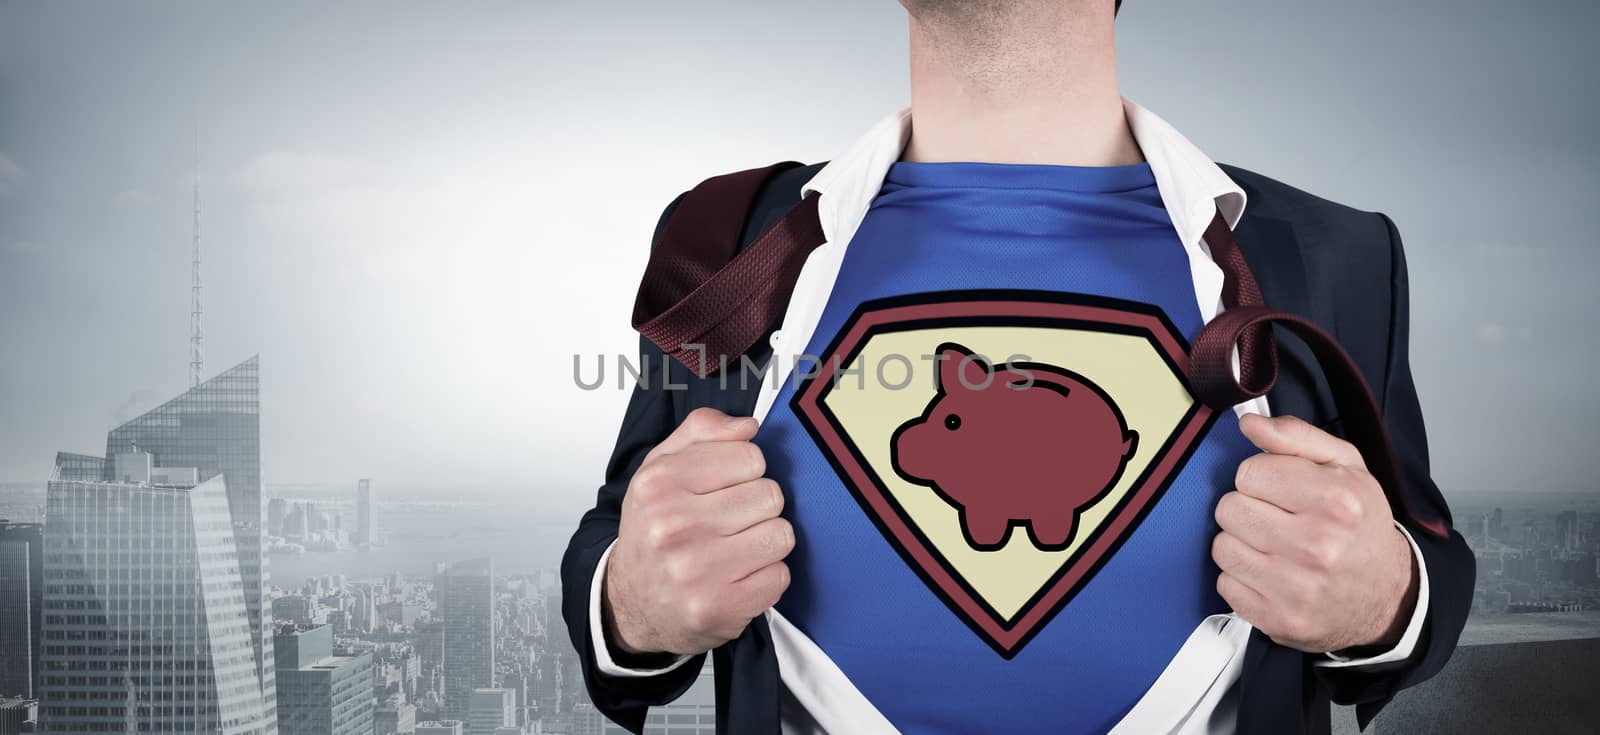 Businessman opening shirt in superhero style against misty cityscape